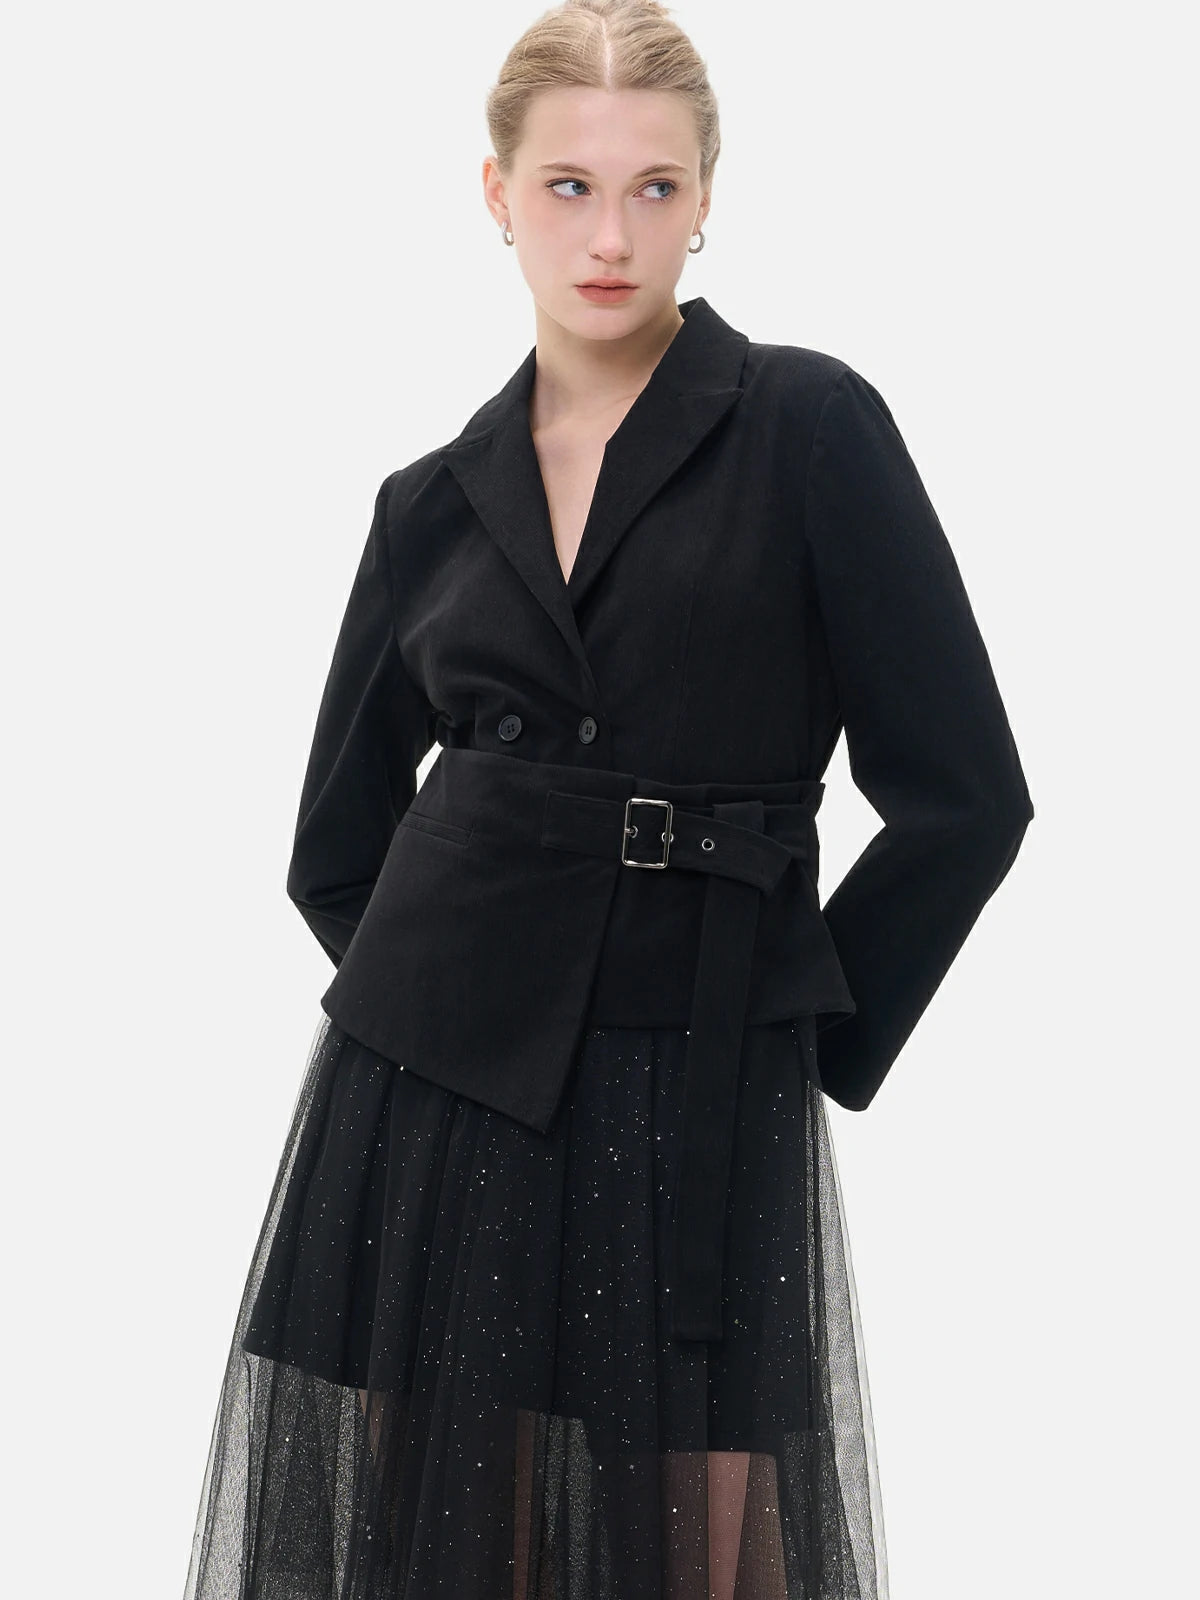 Professional women's fashion ensemble, combining a classic double-breasted suit with a detachable waist belt and an elegantly attached mesh skirt.